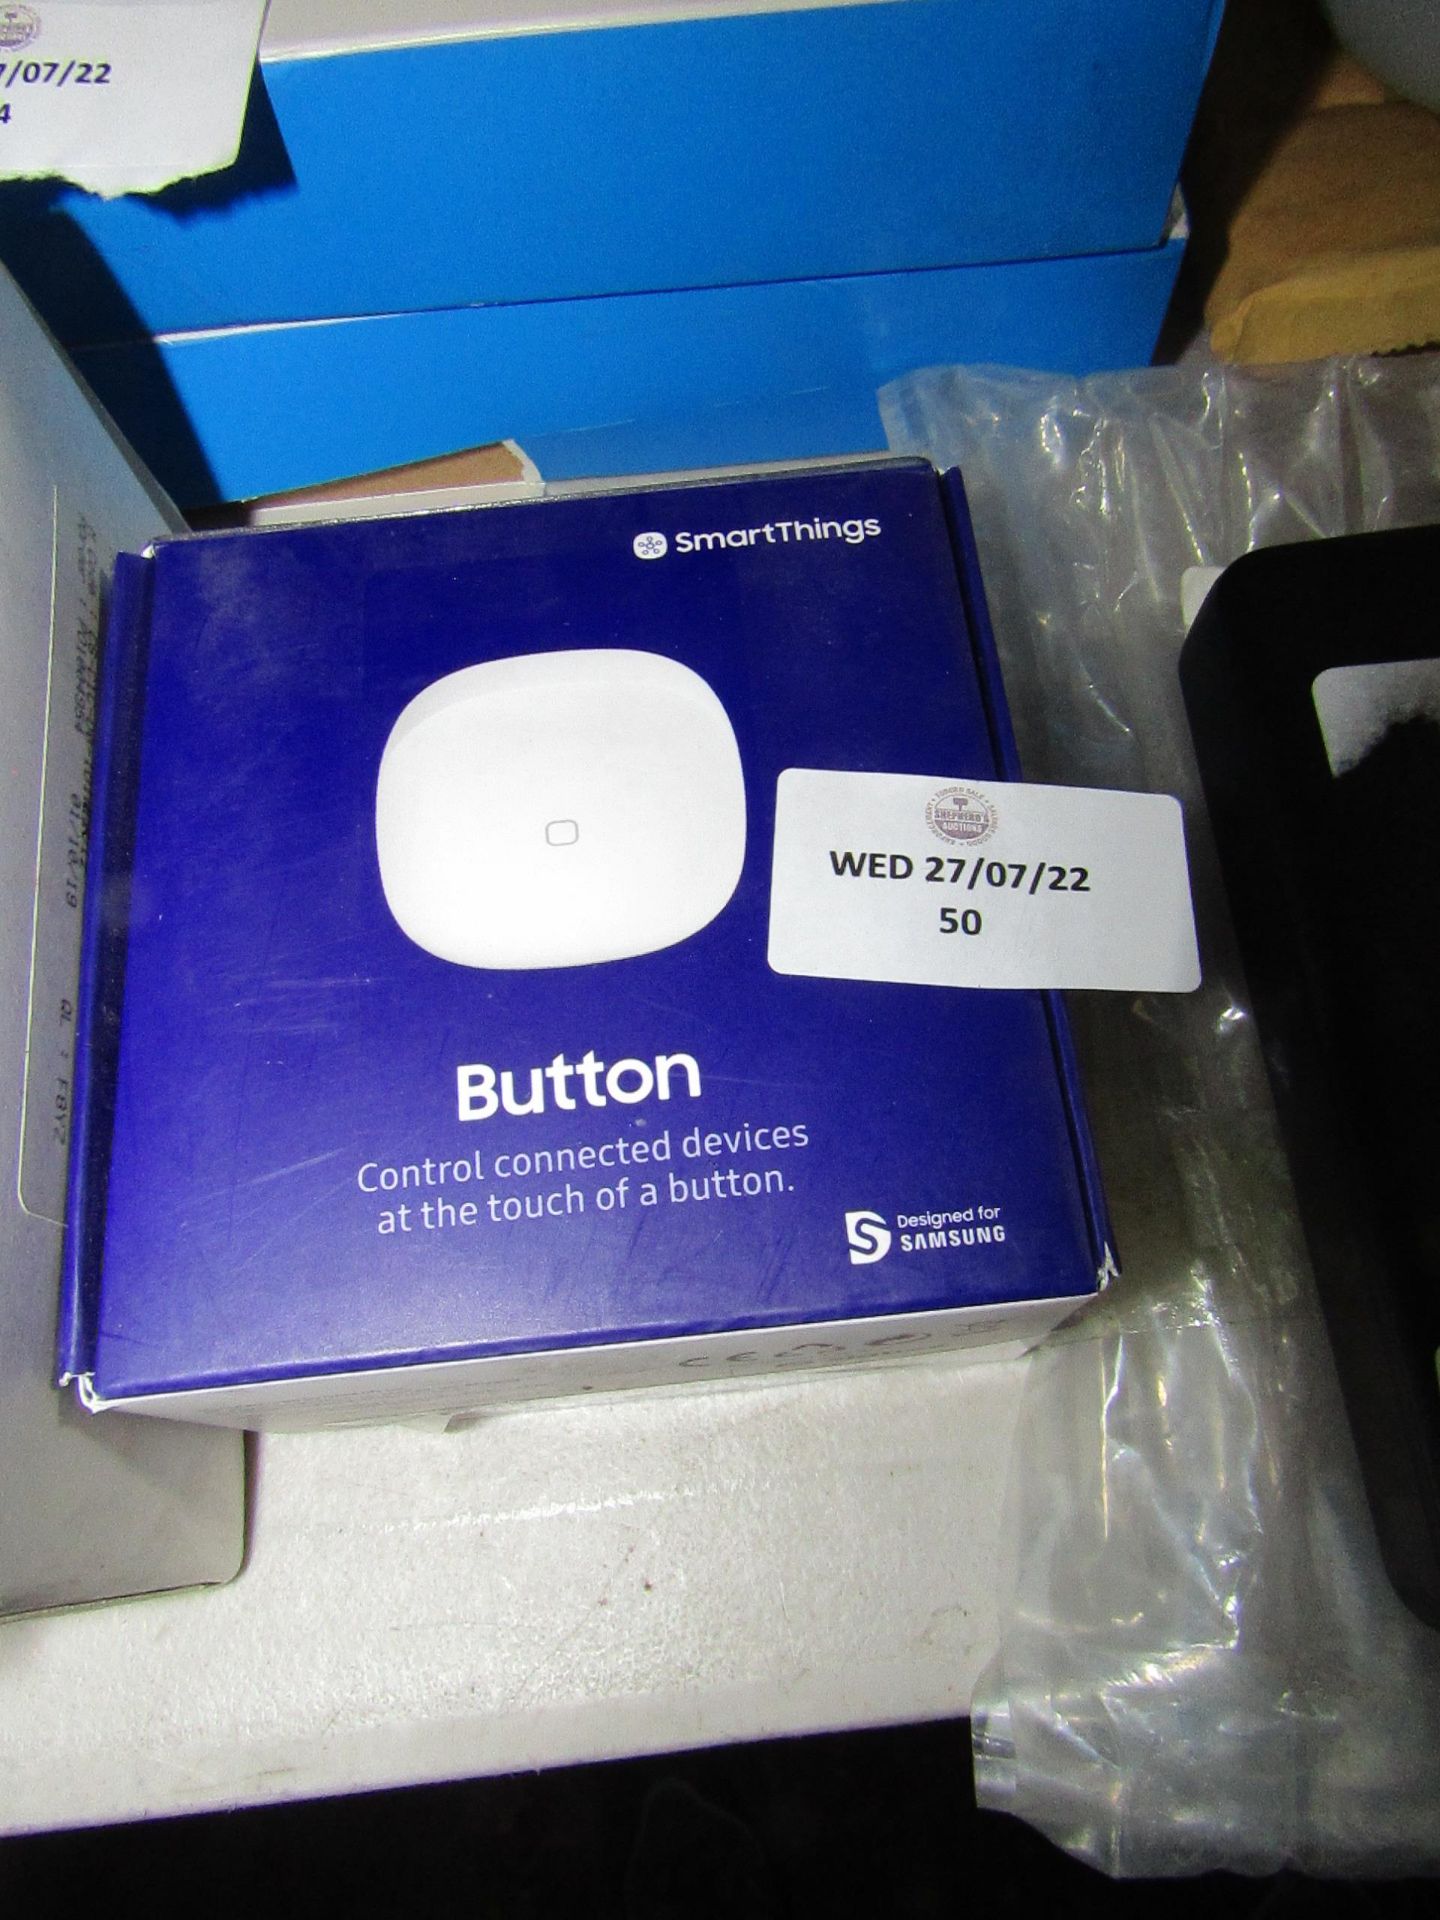 Smart Things - Button Zigbee light switch / dimmer - Unchecked & Boxed. RRP £25